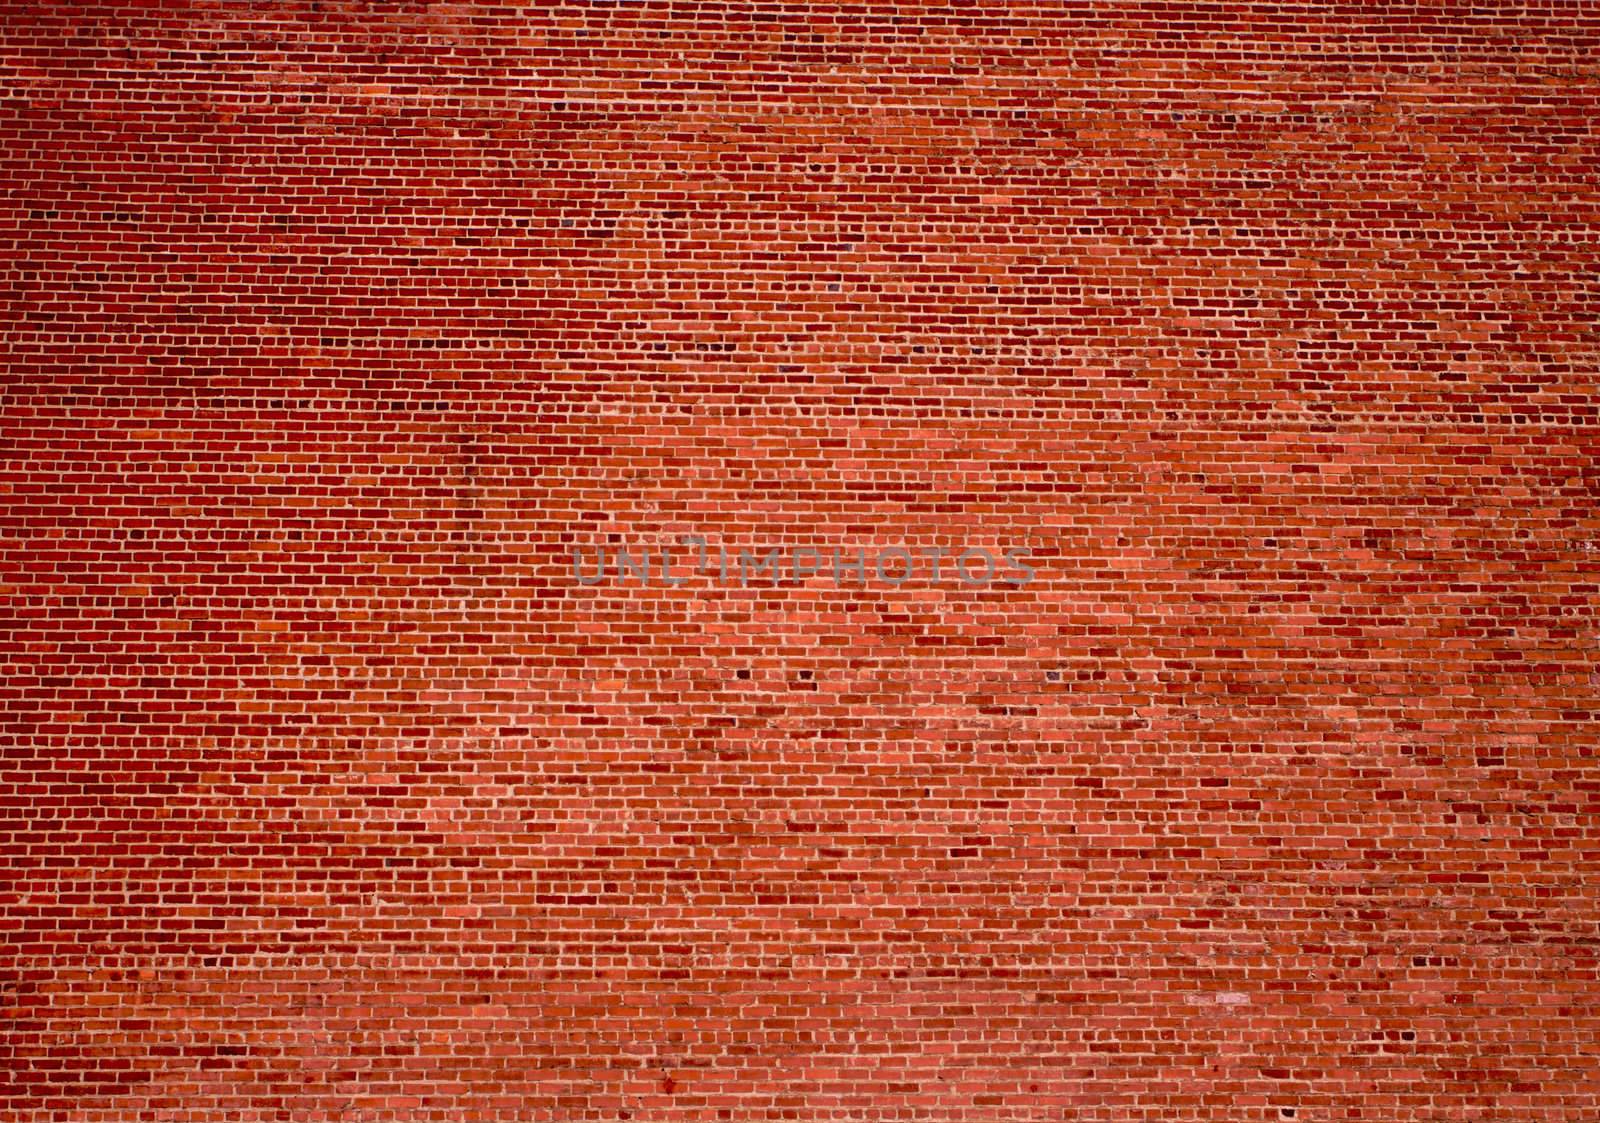 Huge brick backround wall from an old building in Sacramento California